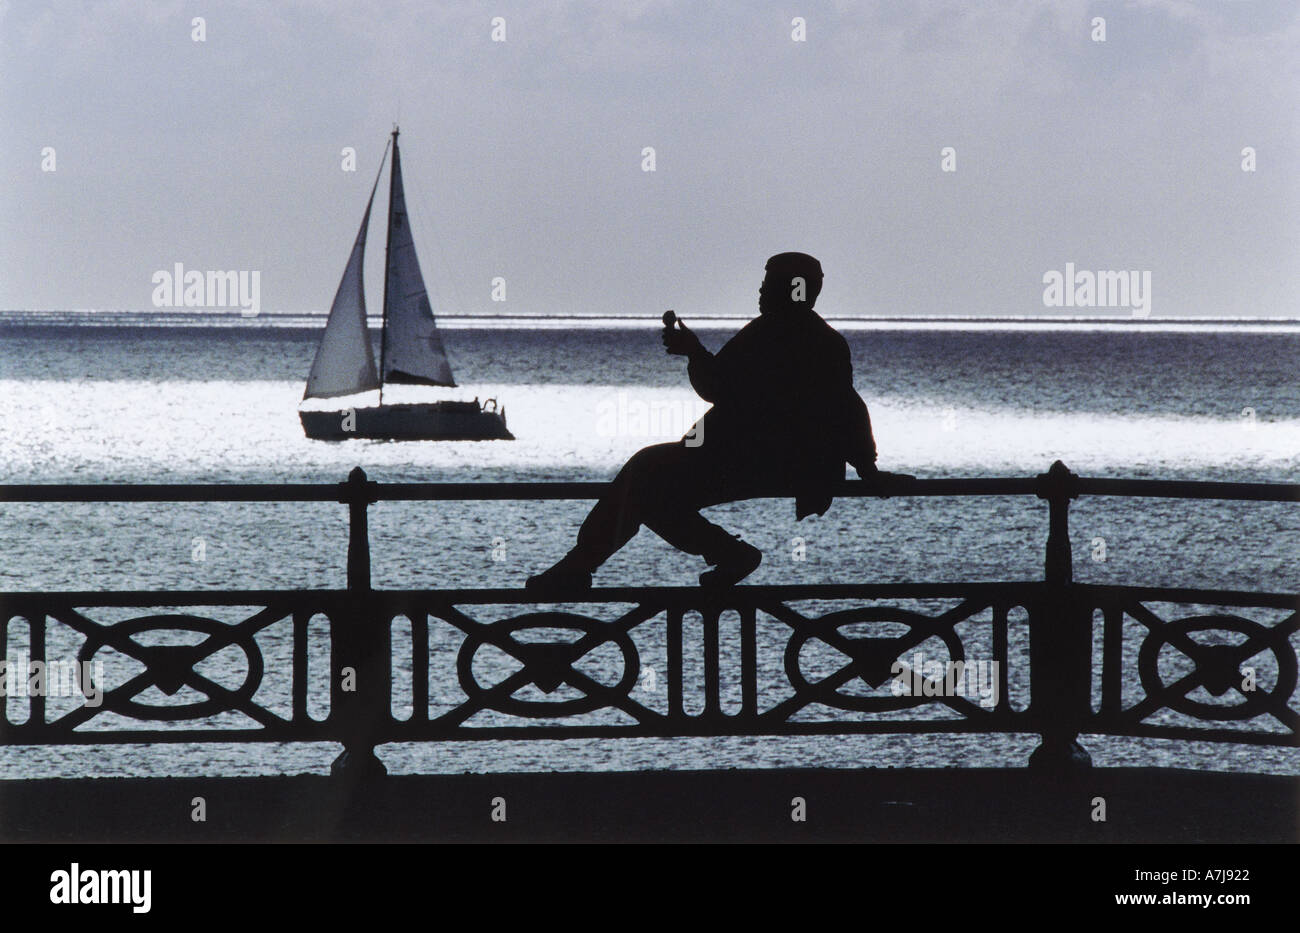 Seafront of the city of Brighton and Hove. A plump woman sits on railings eating ice cream as a yacht  sails past. Stock Photo